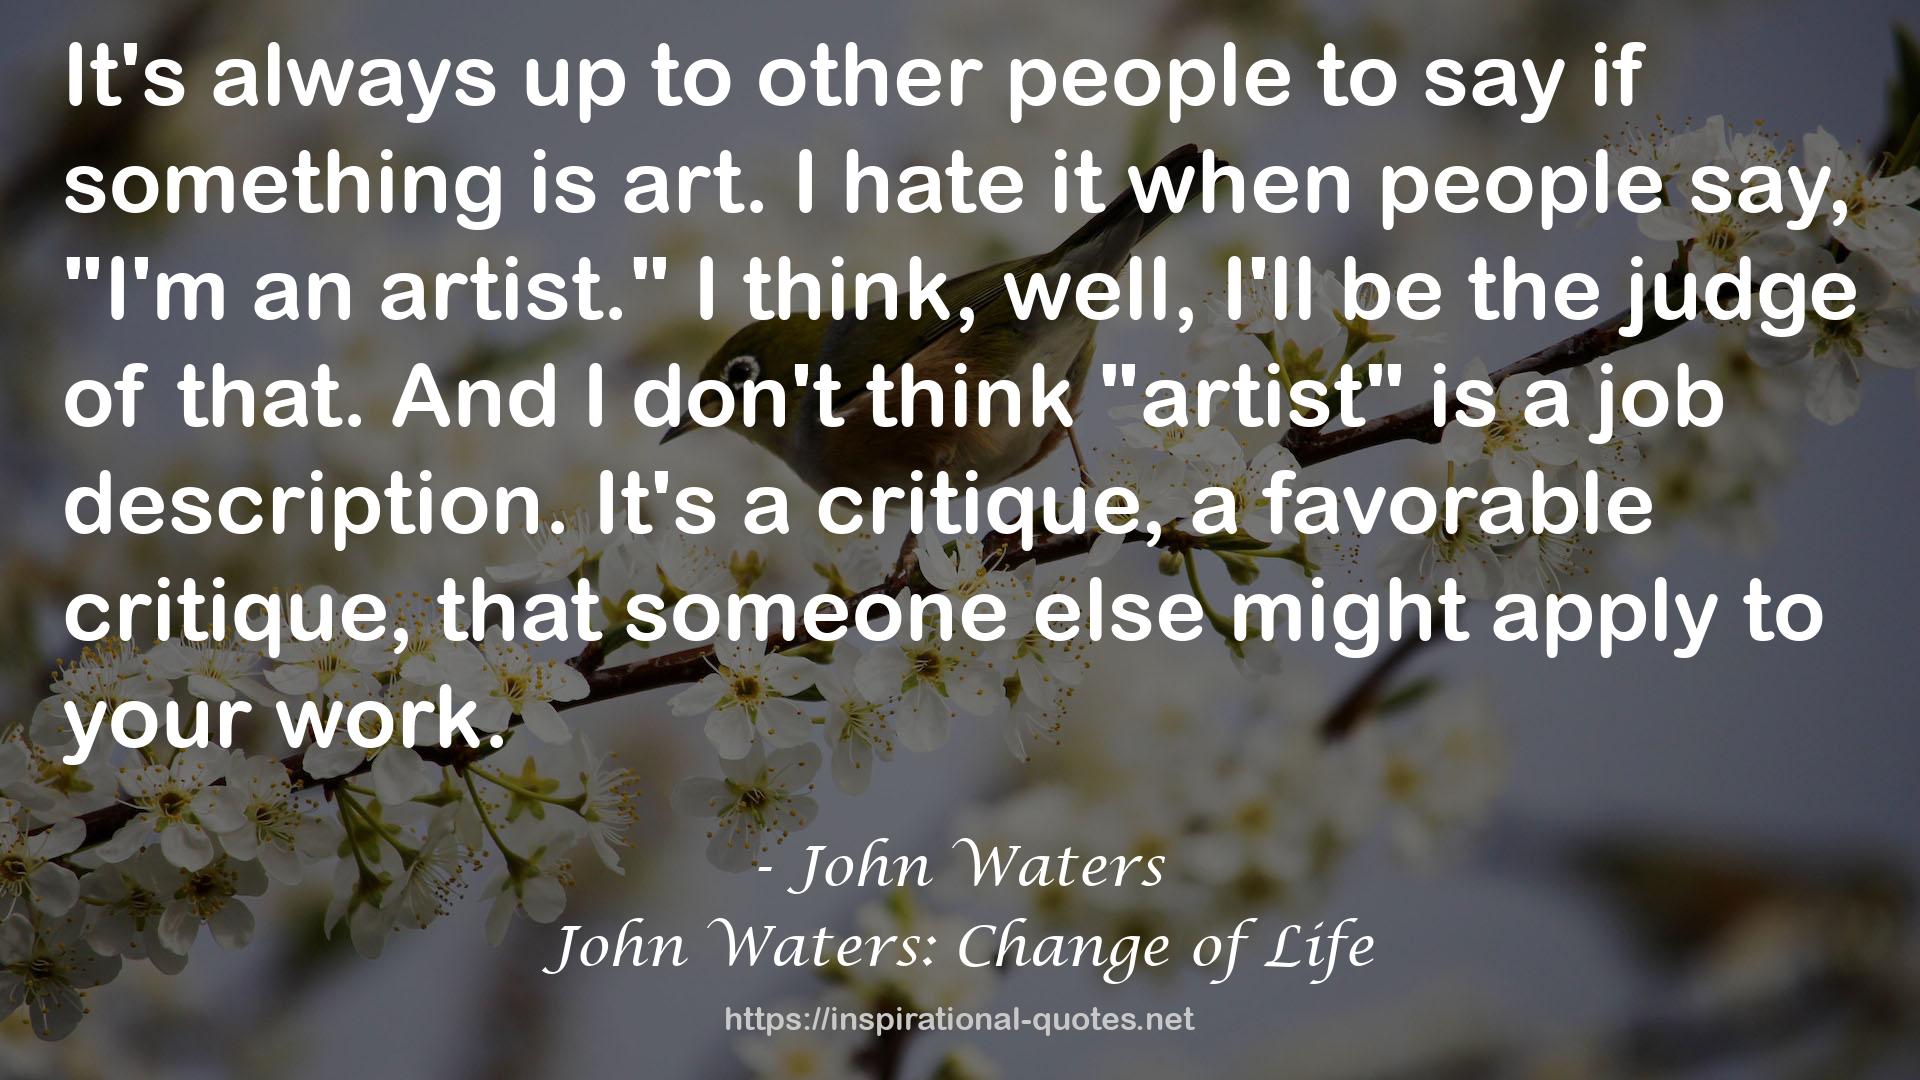 John Waters: Change of Life QUOTES